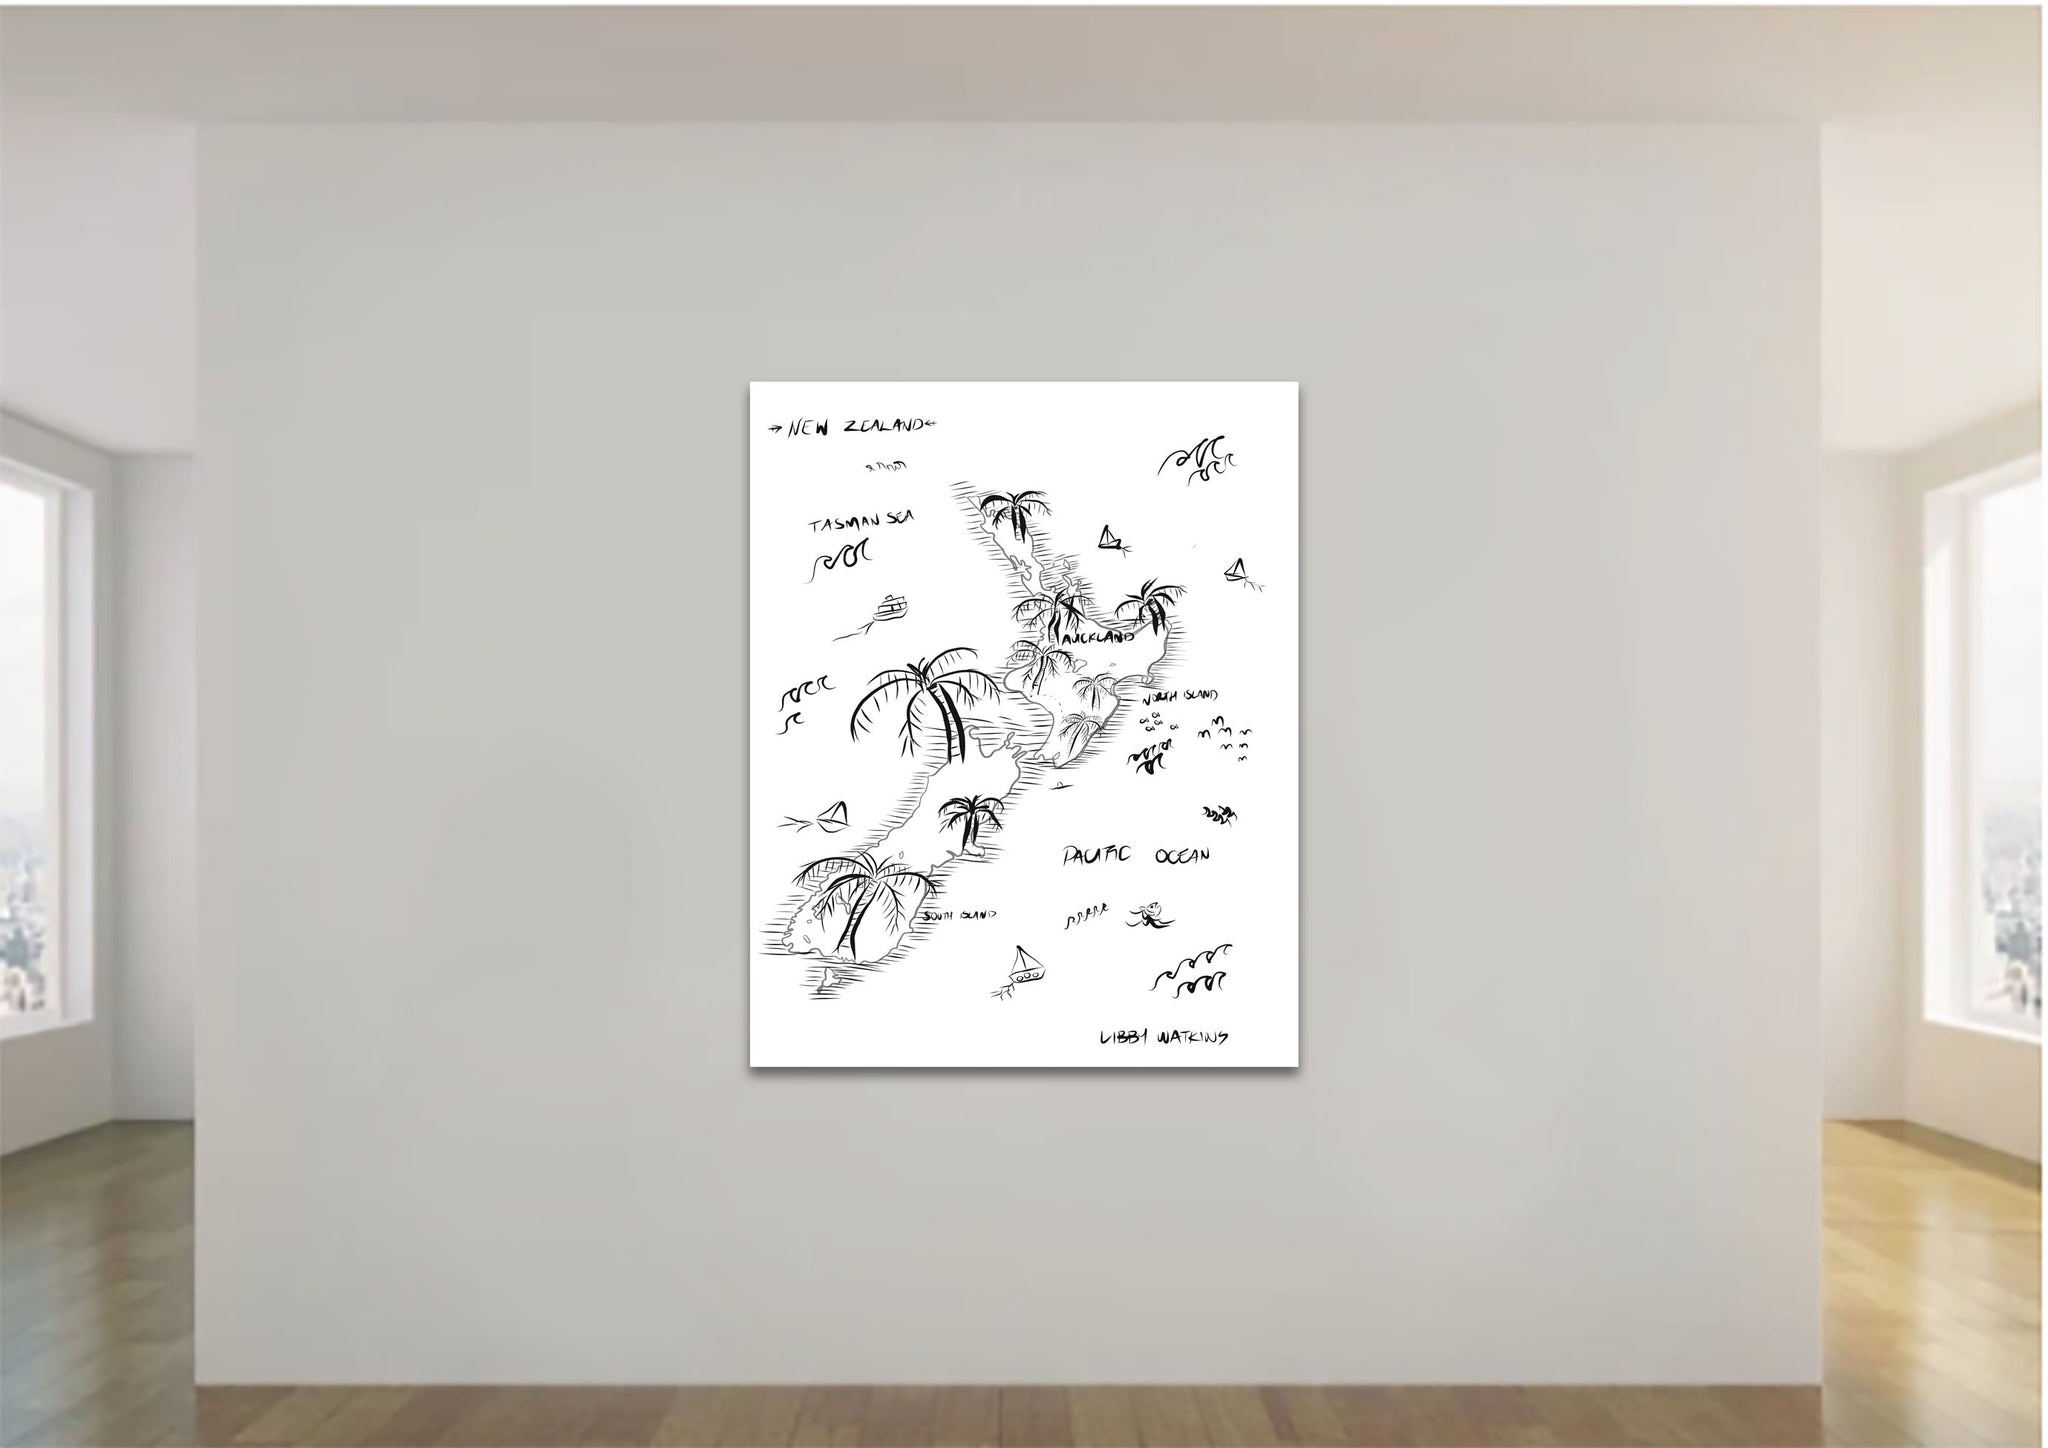 New Zealand Pirate Map Canvas Print